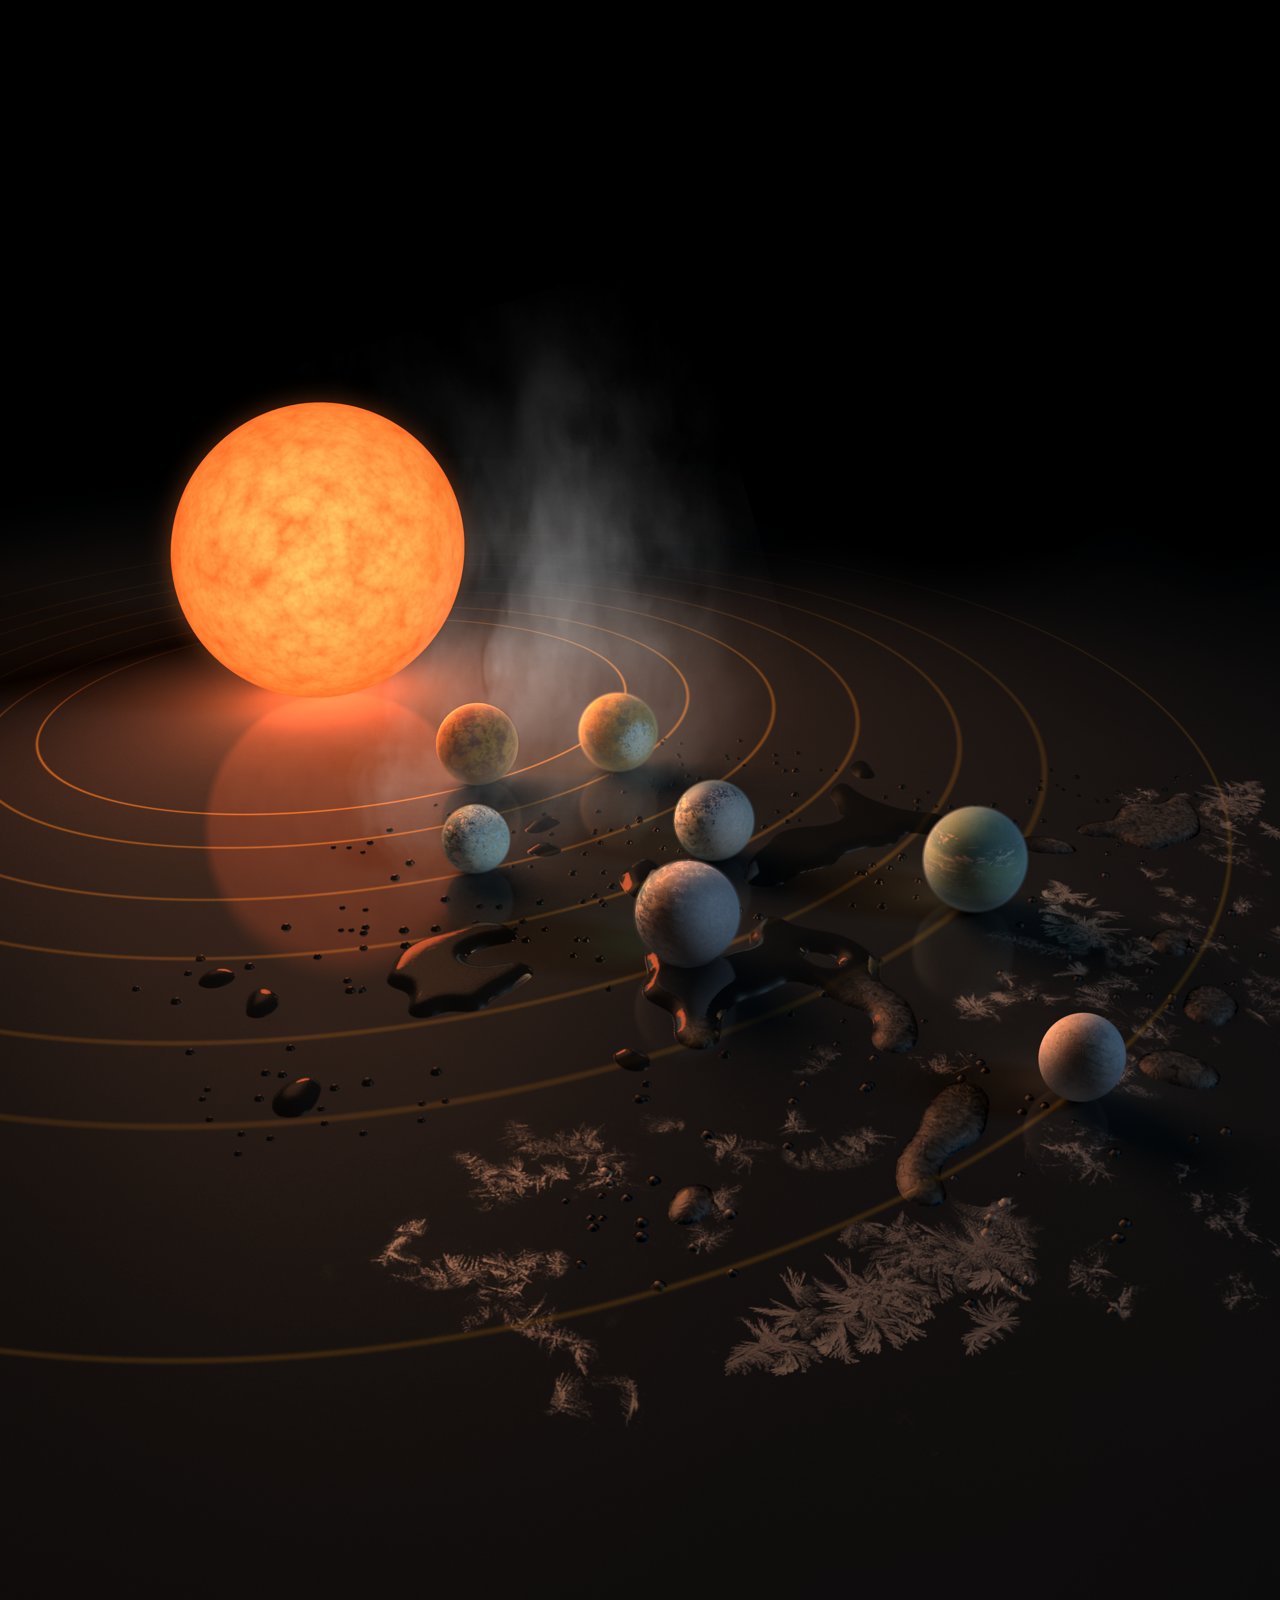 This artist’s impression displays TRAPPIST-1 and its planets reflected in a surface. The potential for water on each of the worlds is also represented by the frost, water pools, and steam surrounding the scene. The image appears on the 22 February 2017 Nature cover.